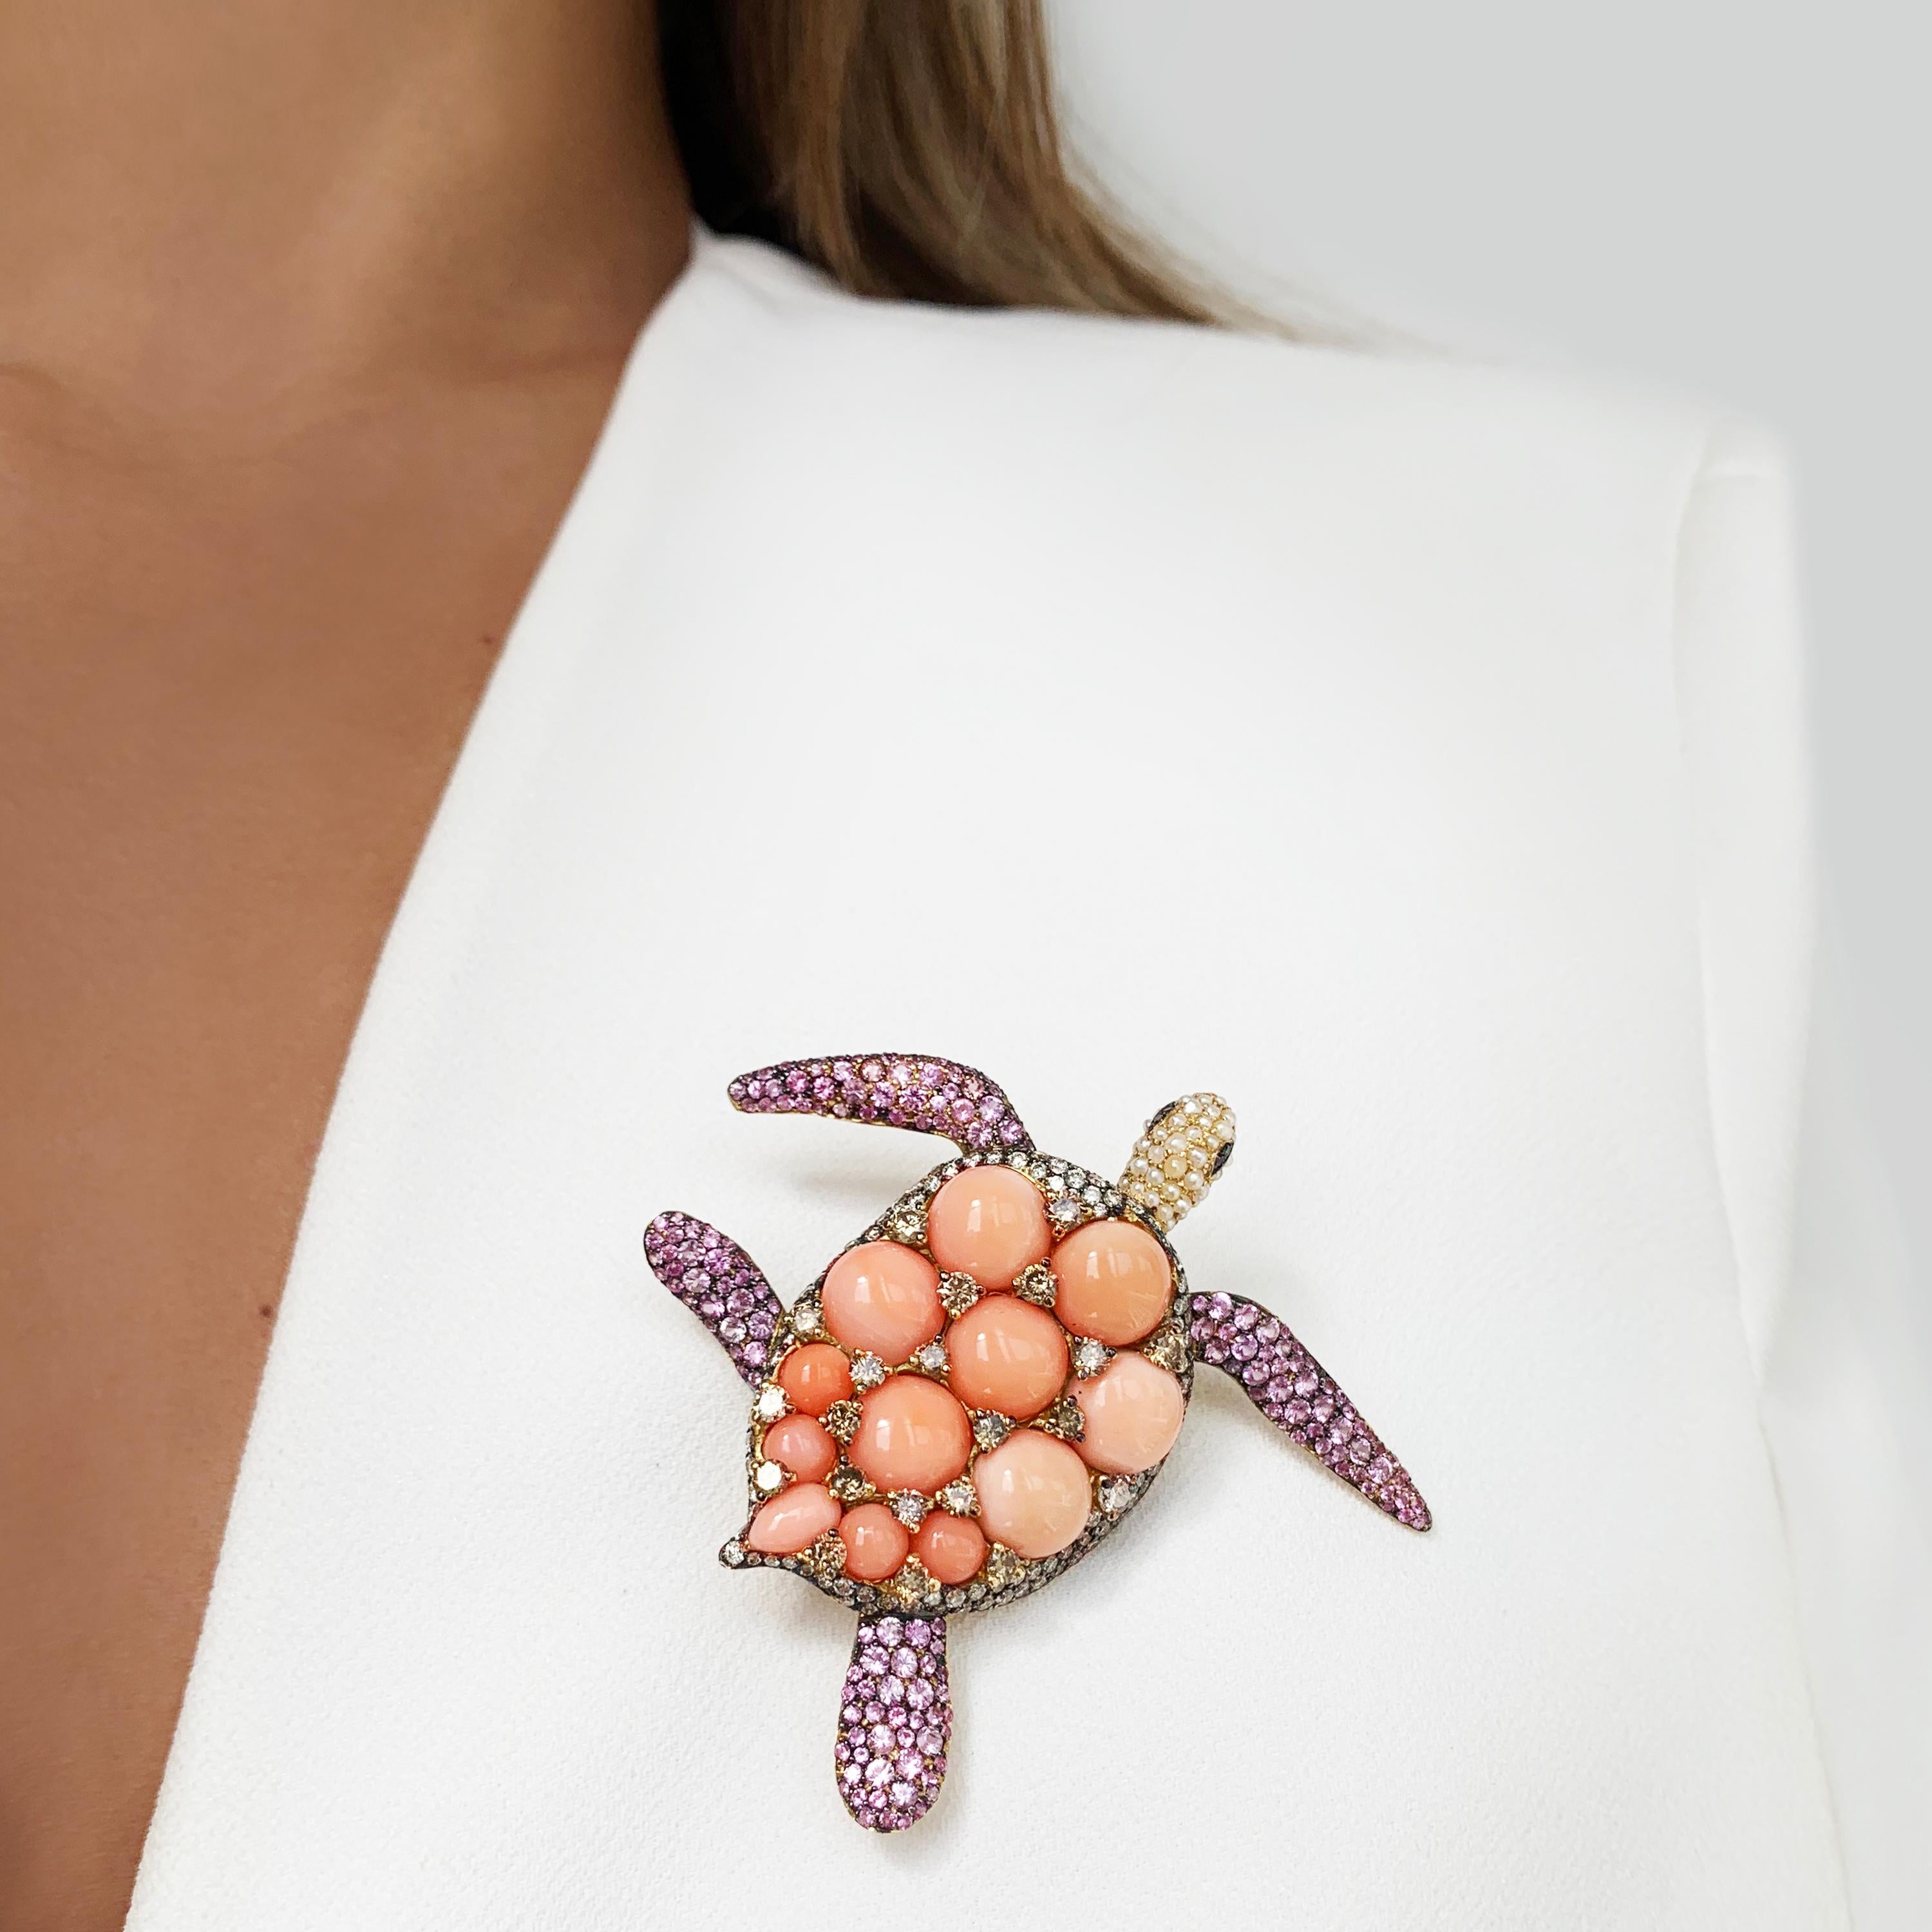 Rosior by Manuel Rosas Turtle Brooch Manufactured in 19.2K Yellow Gold, set with:
- 7 round 